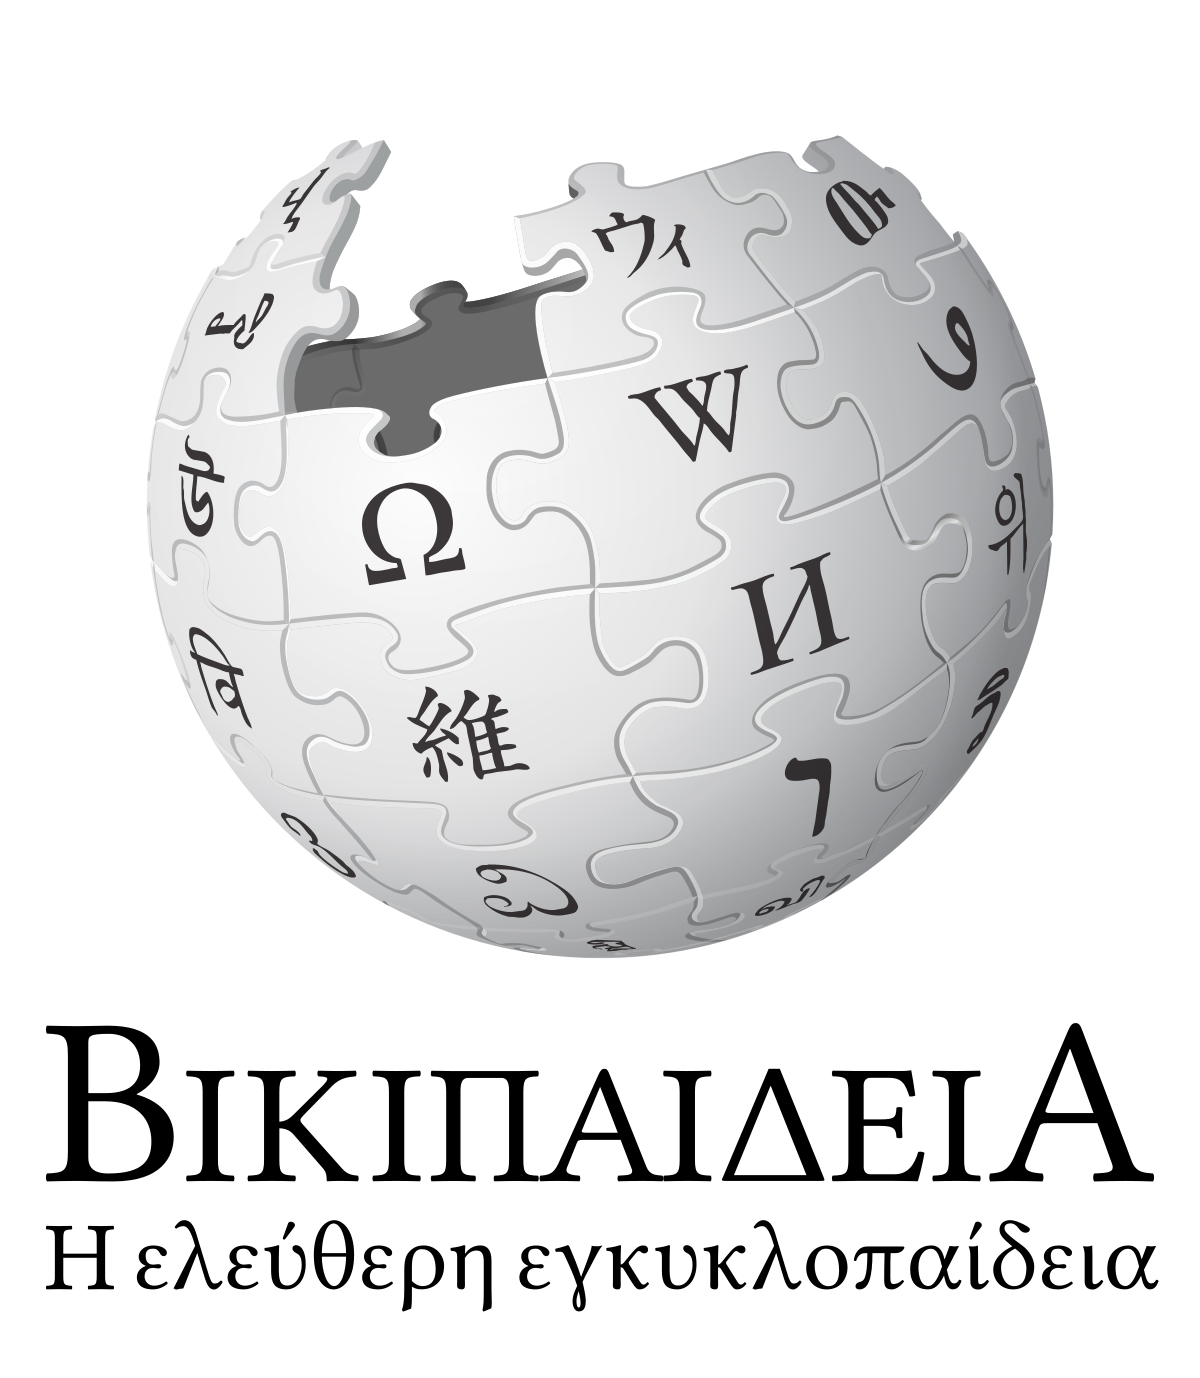 https://upload.wikimedia.org/wikipedia/commons/thumb/6/6c/Wikipedia-logo-v2-el.svg/1200px-Wikipedia-logo-v2-el.svg.png